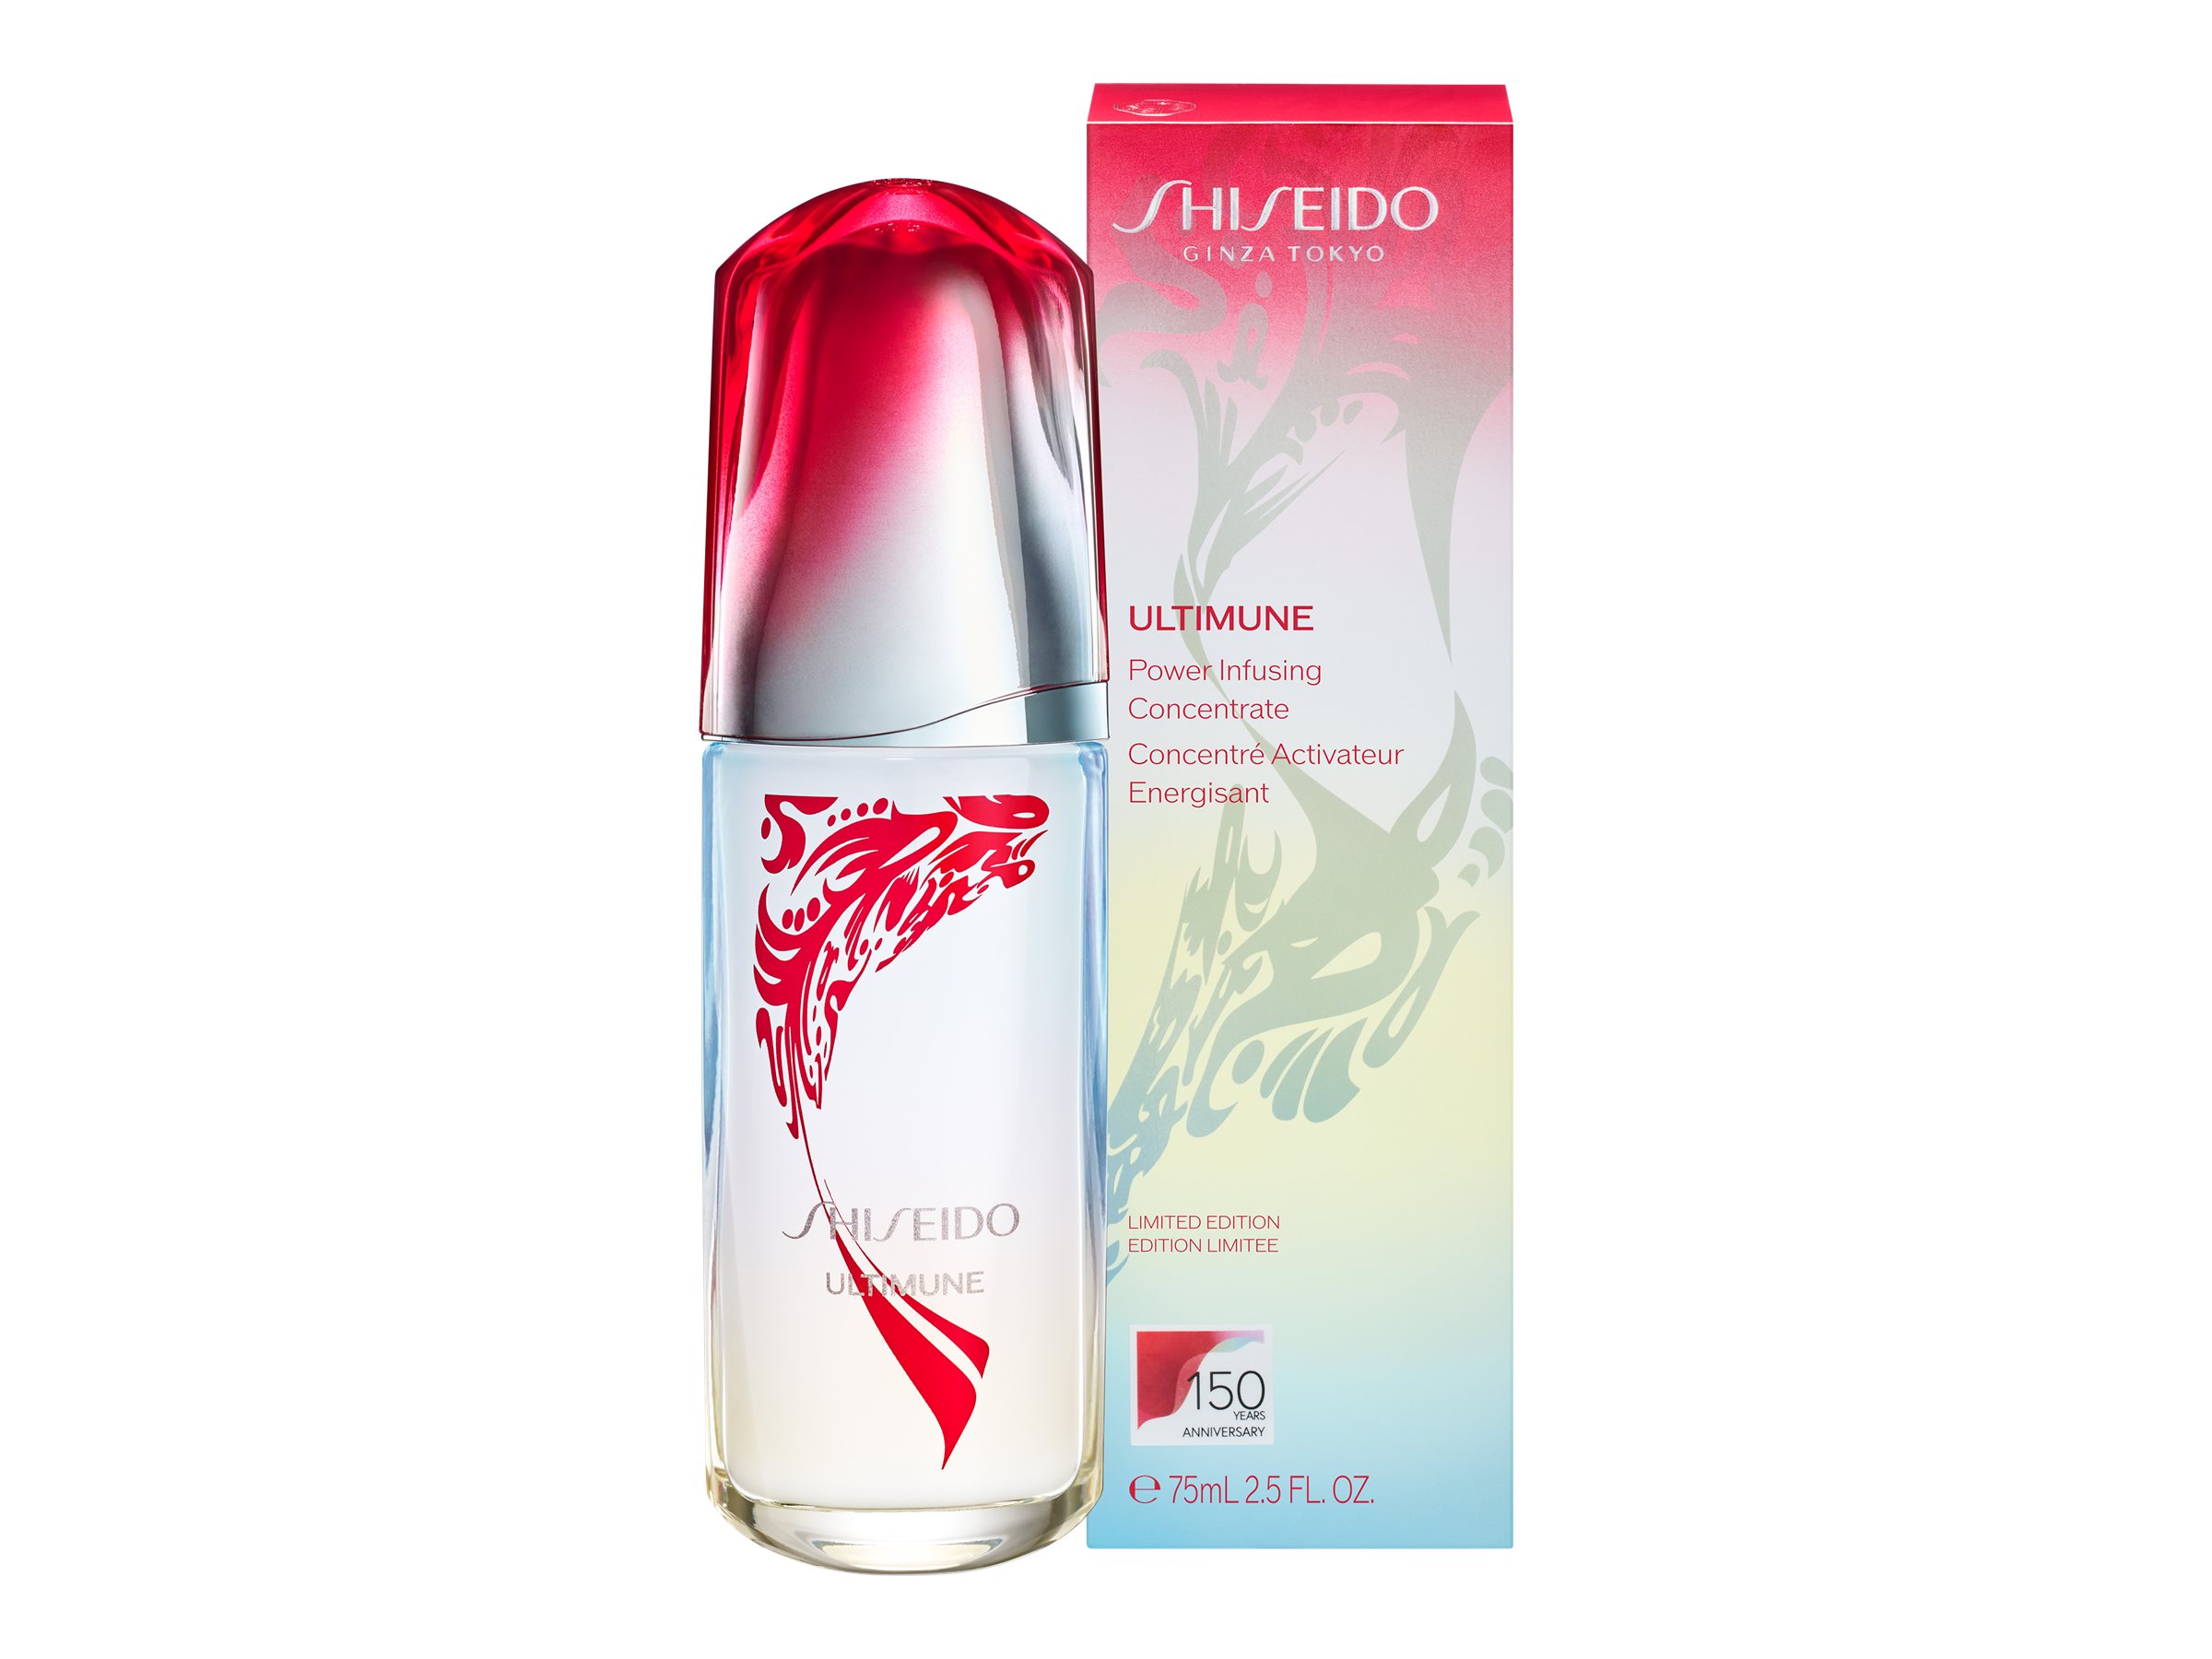 Shiseido Ultimune 150 Years Anniversary Limited Edition Power Infusing Concentrate - 75ml